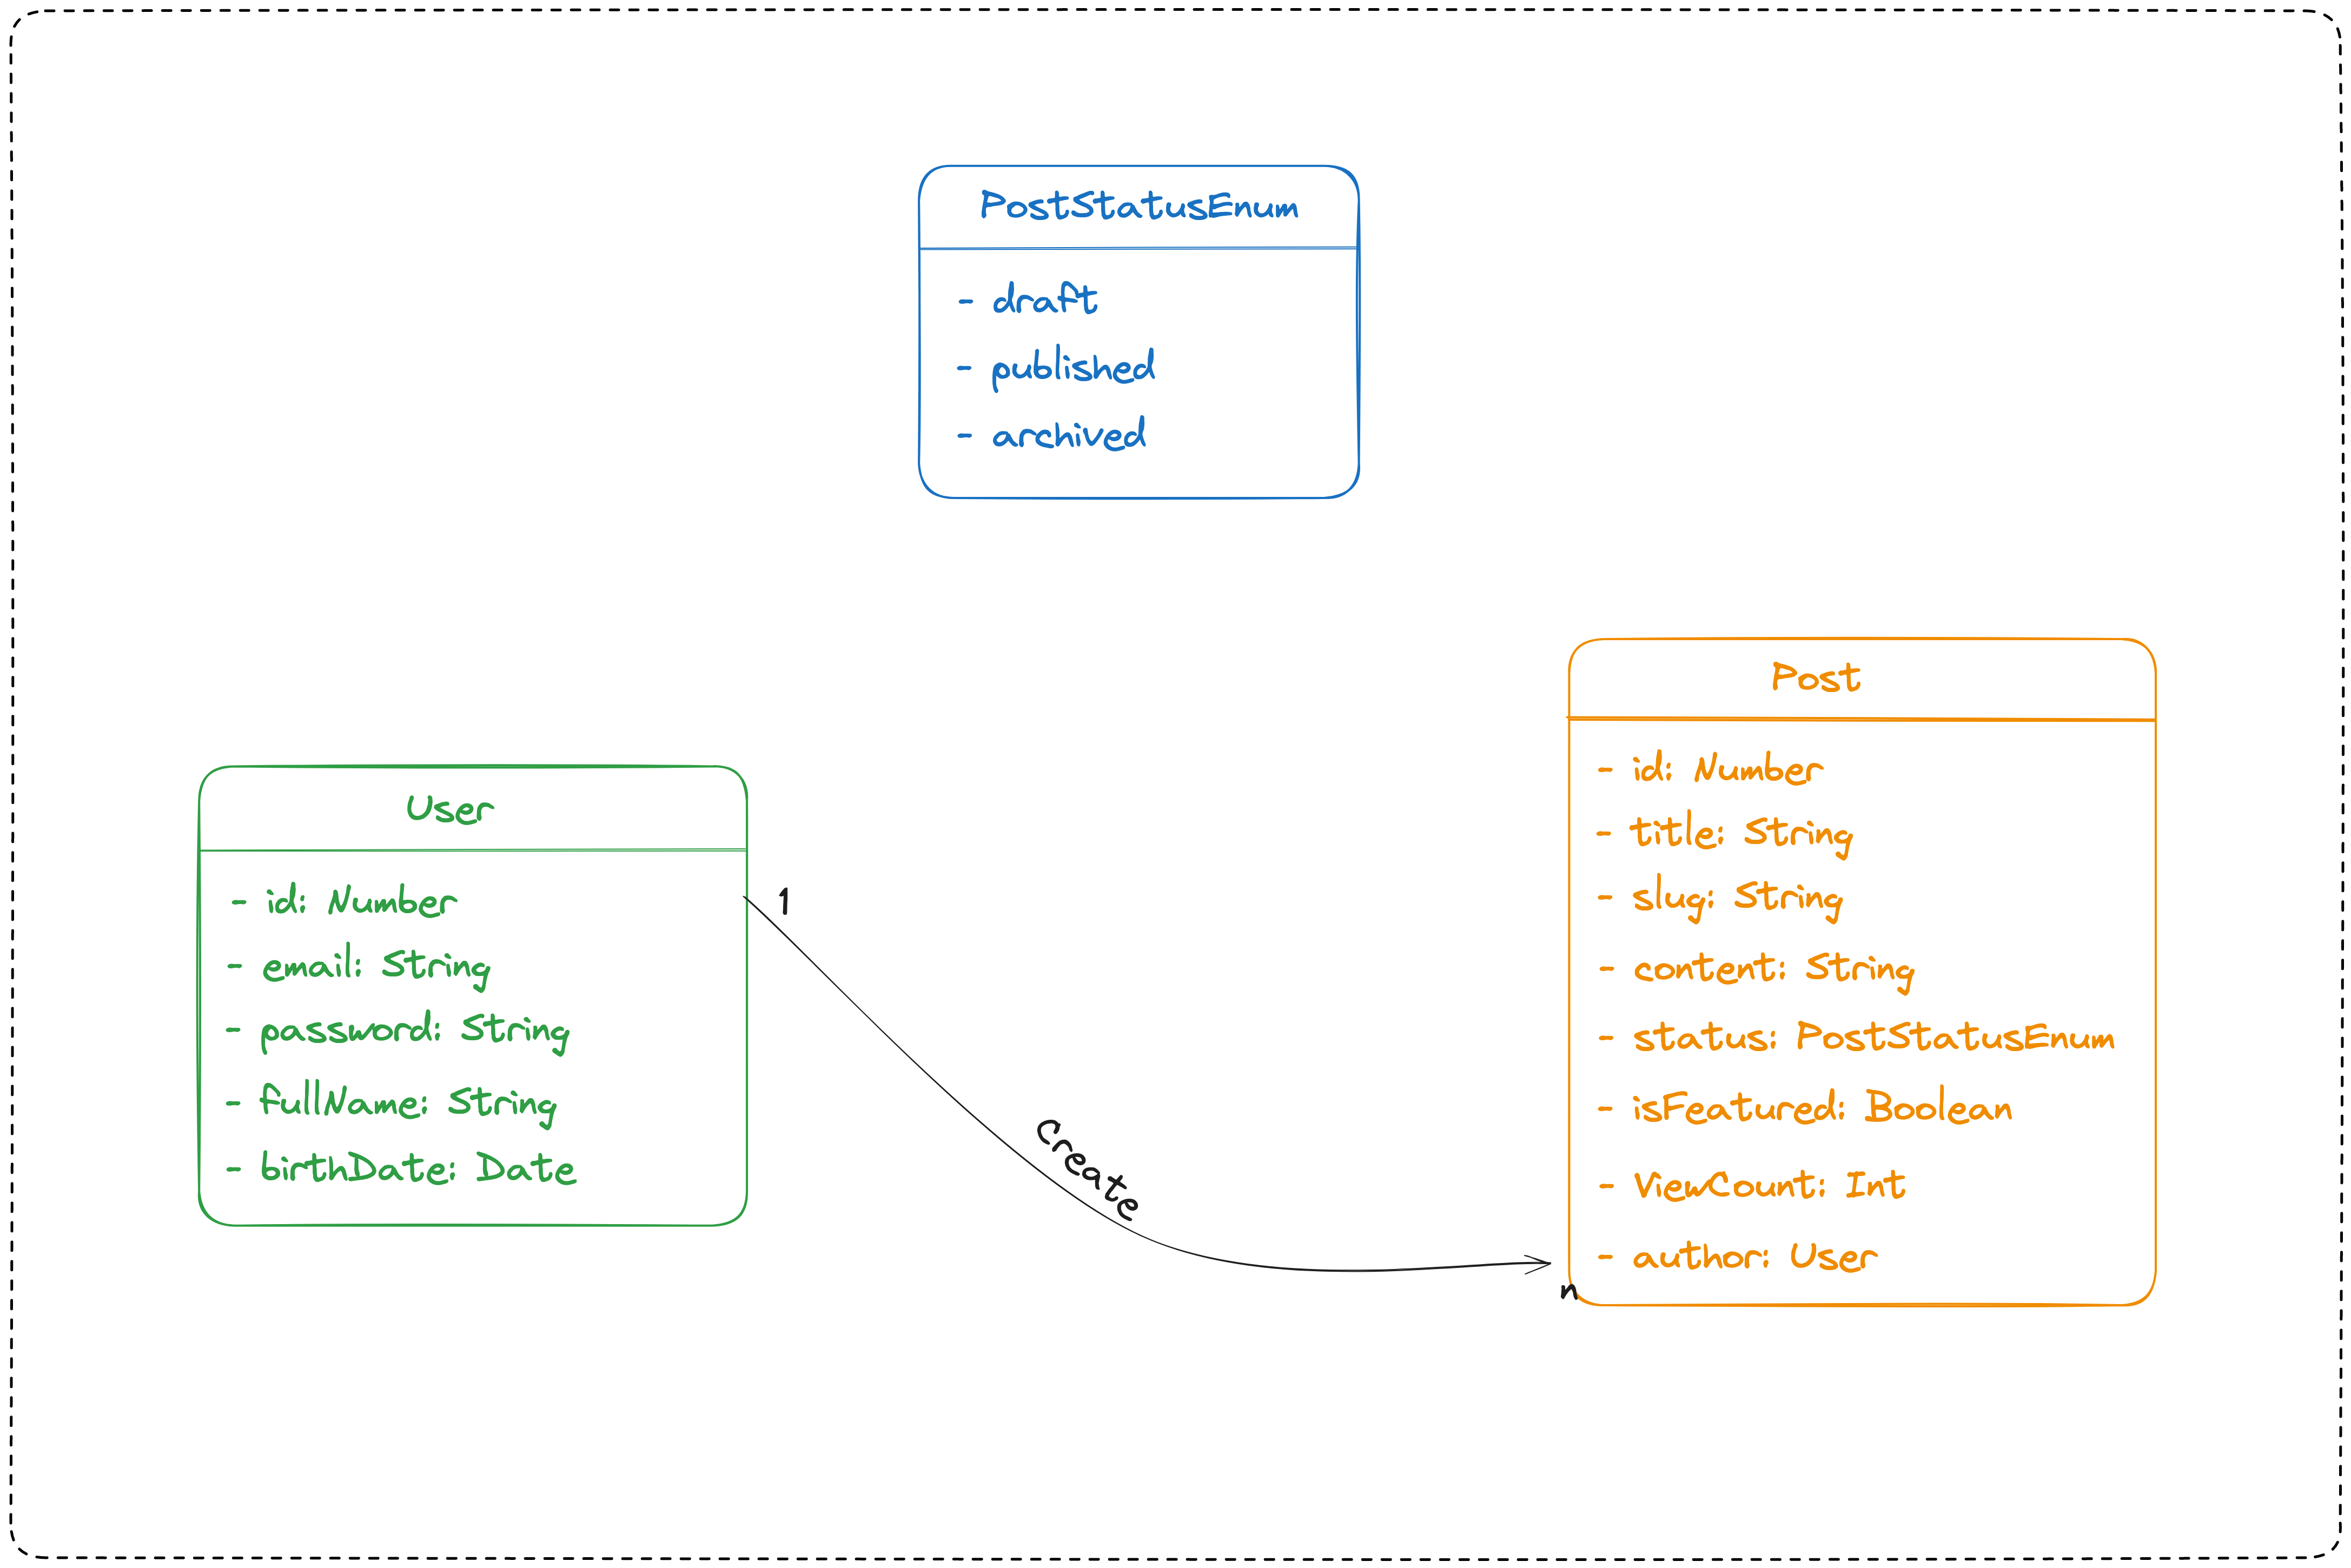 The database schema of the system.